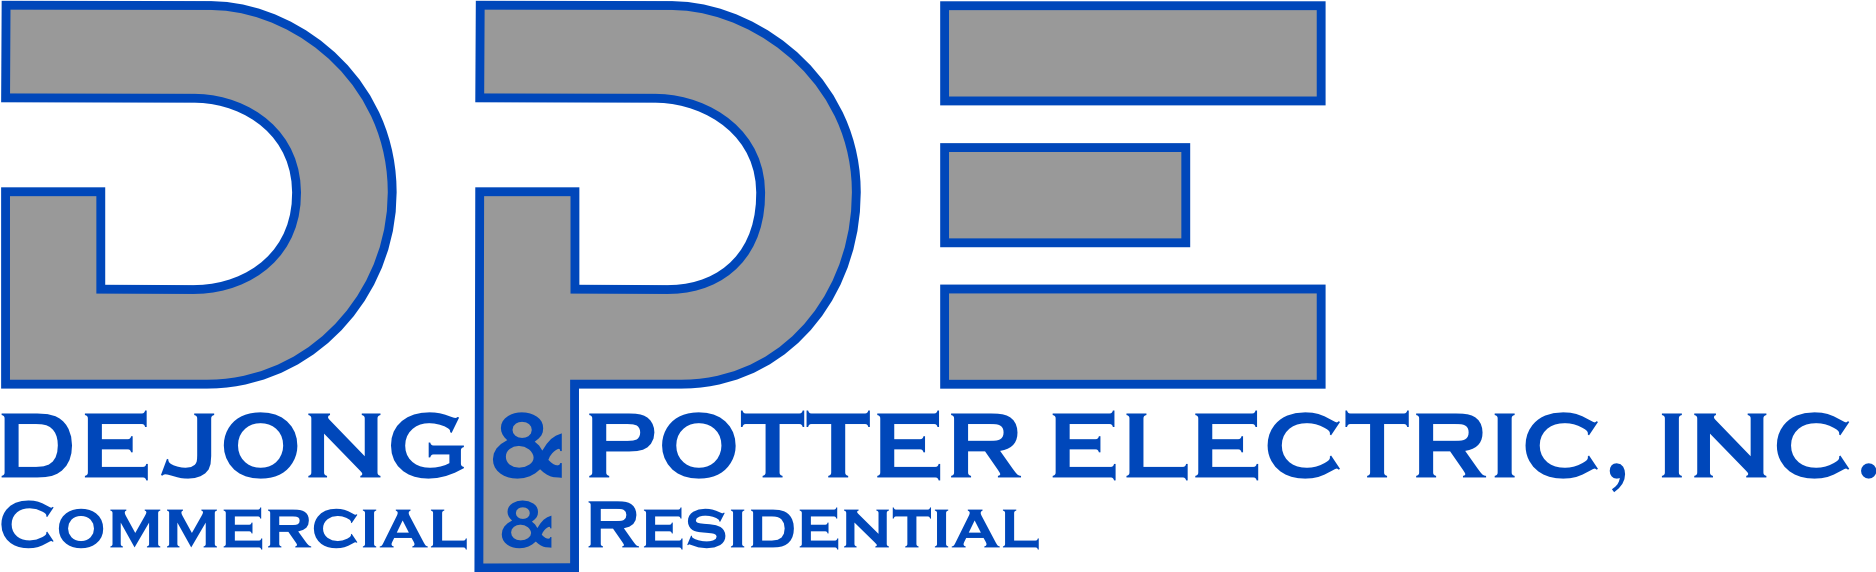 DeJong and Potter Electric